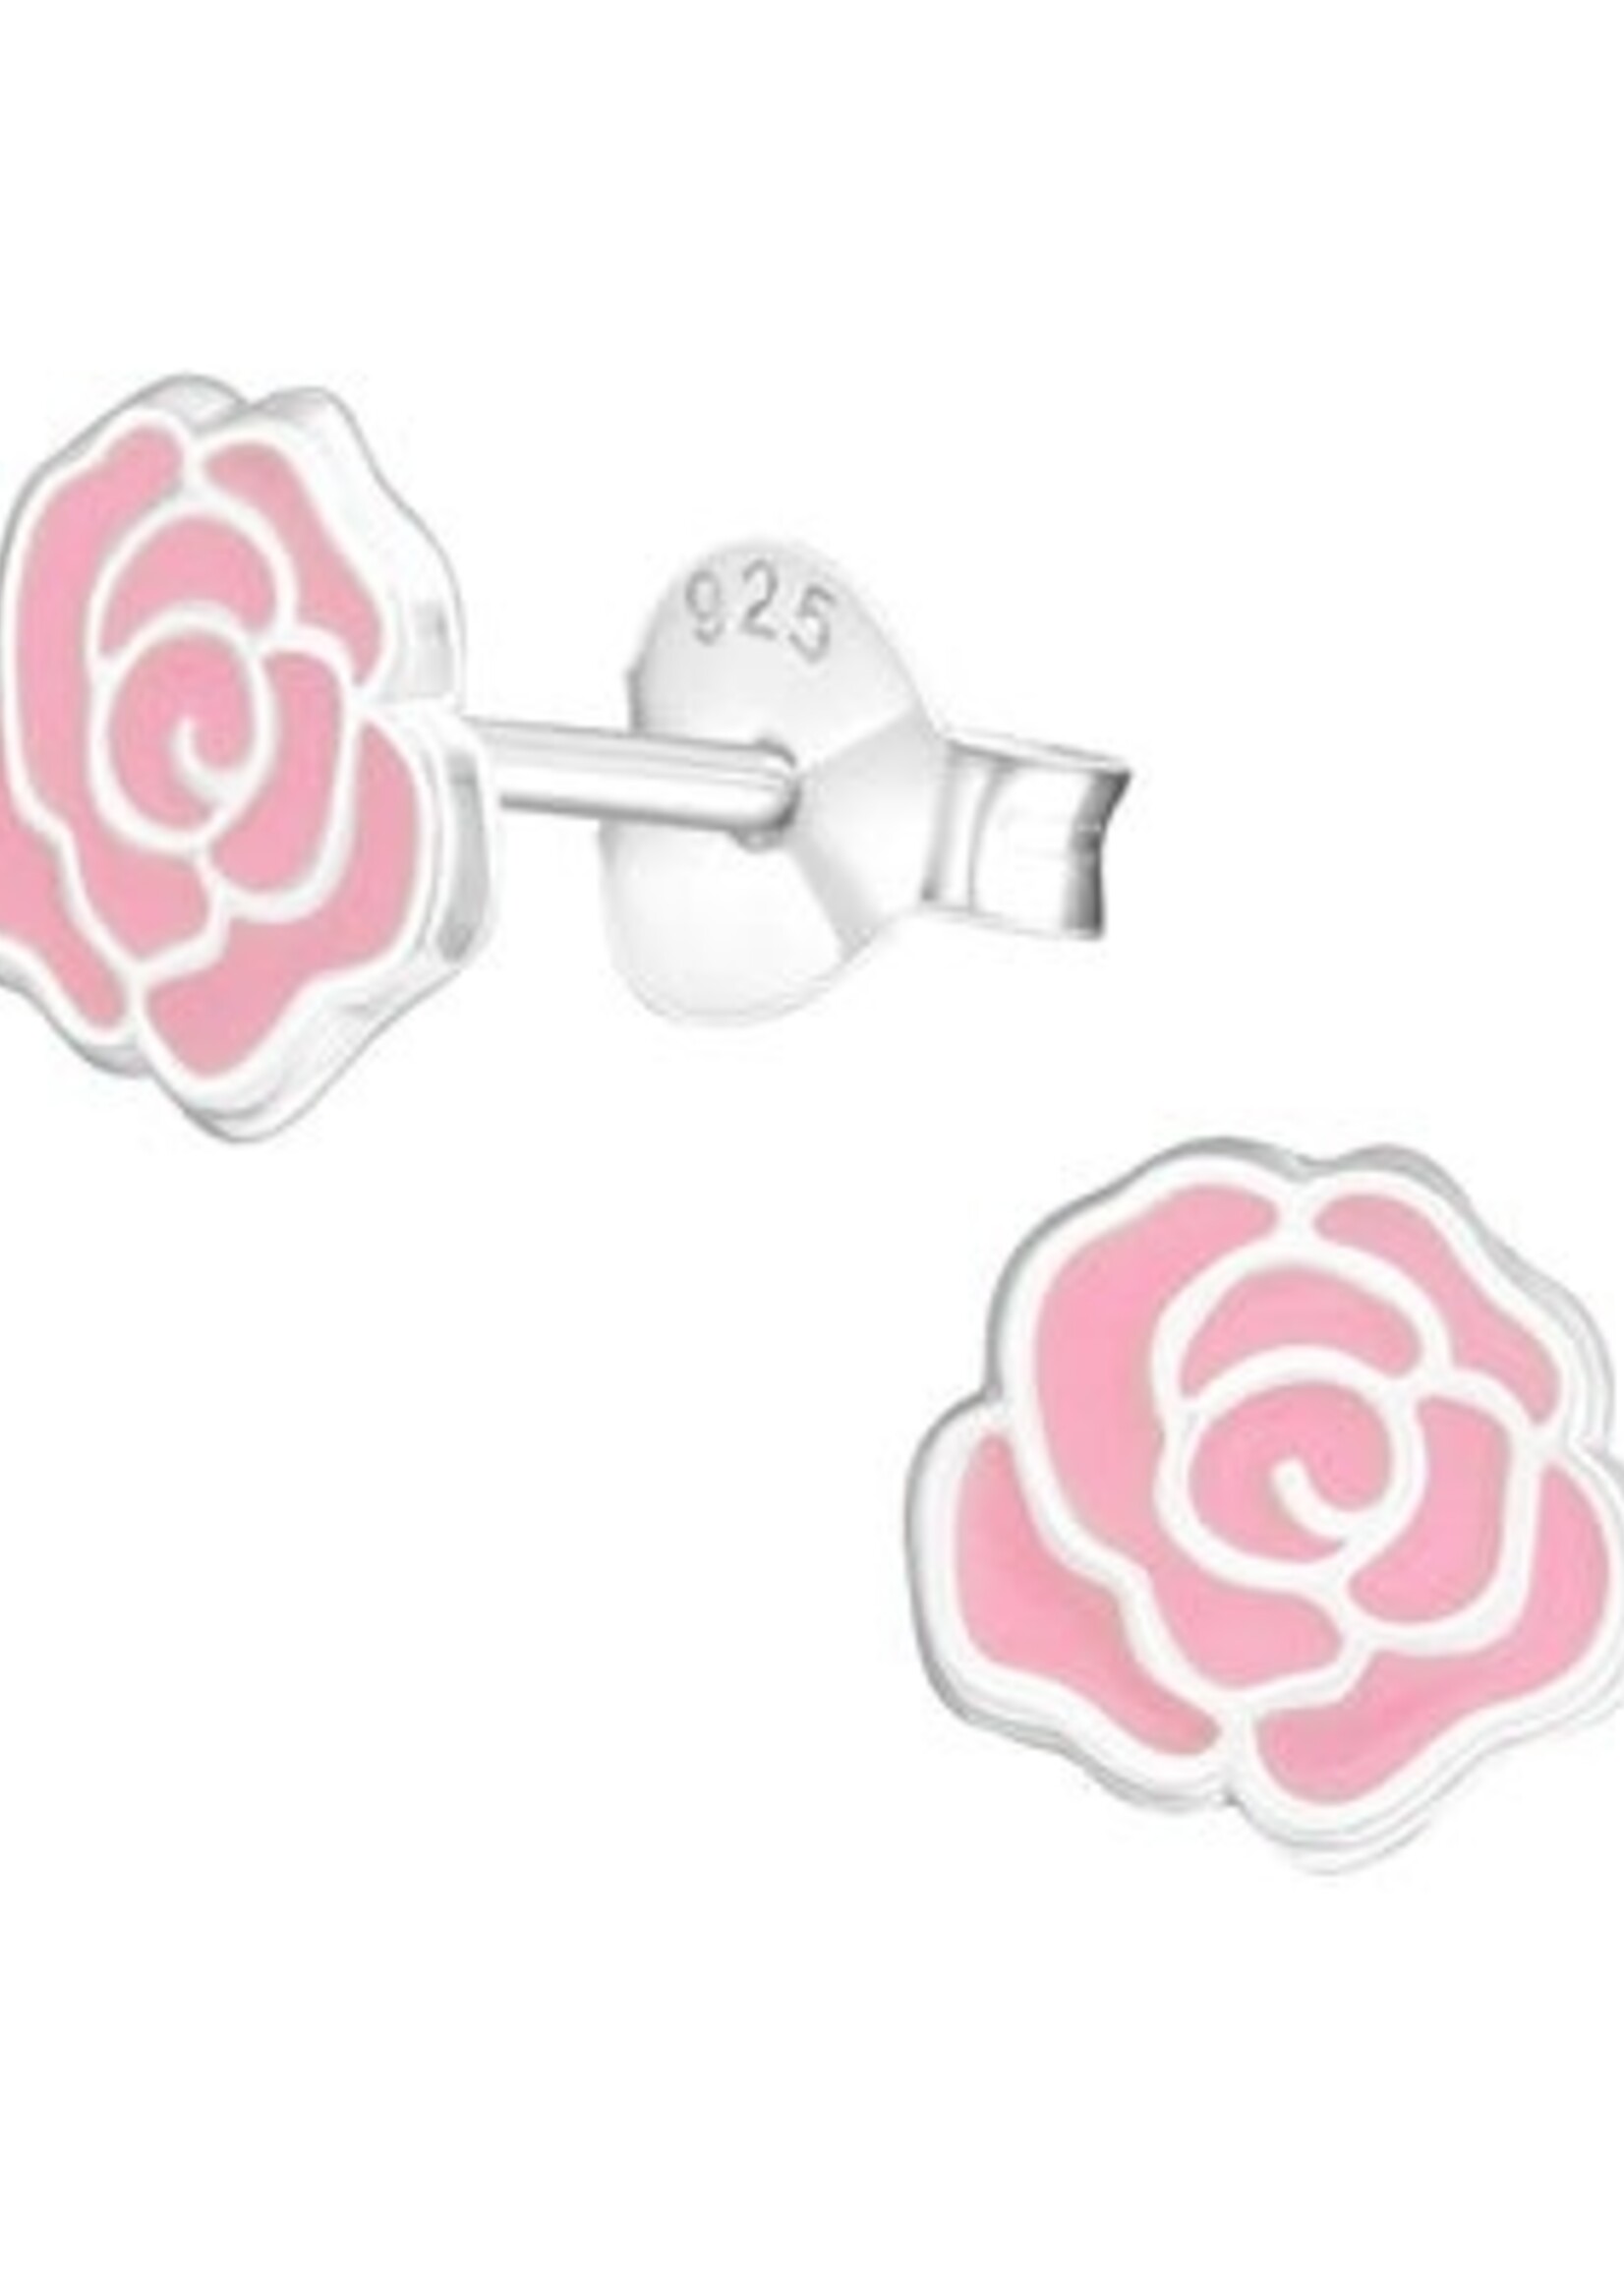 Lily Nily Pink Rose SS Earrings